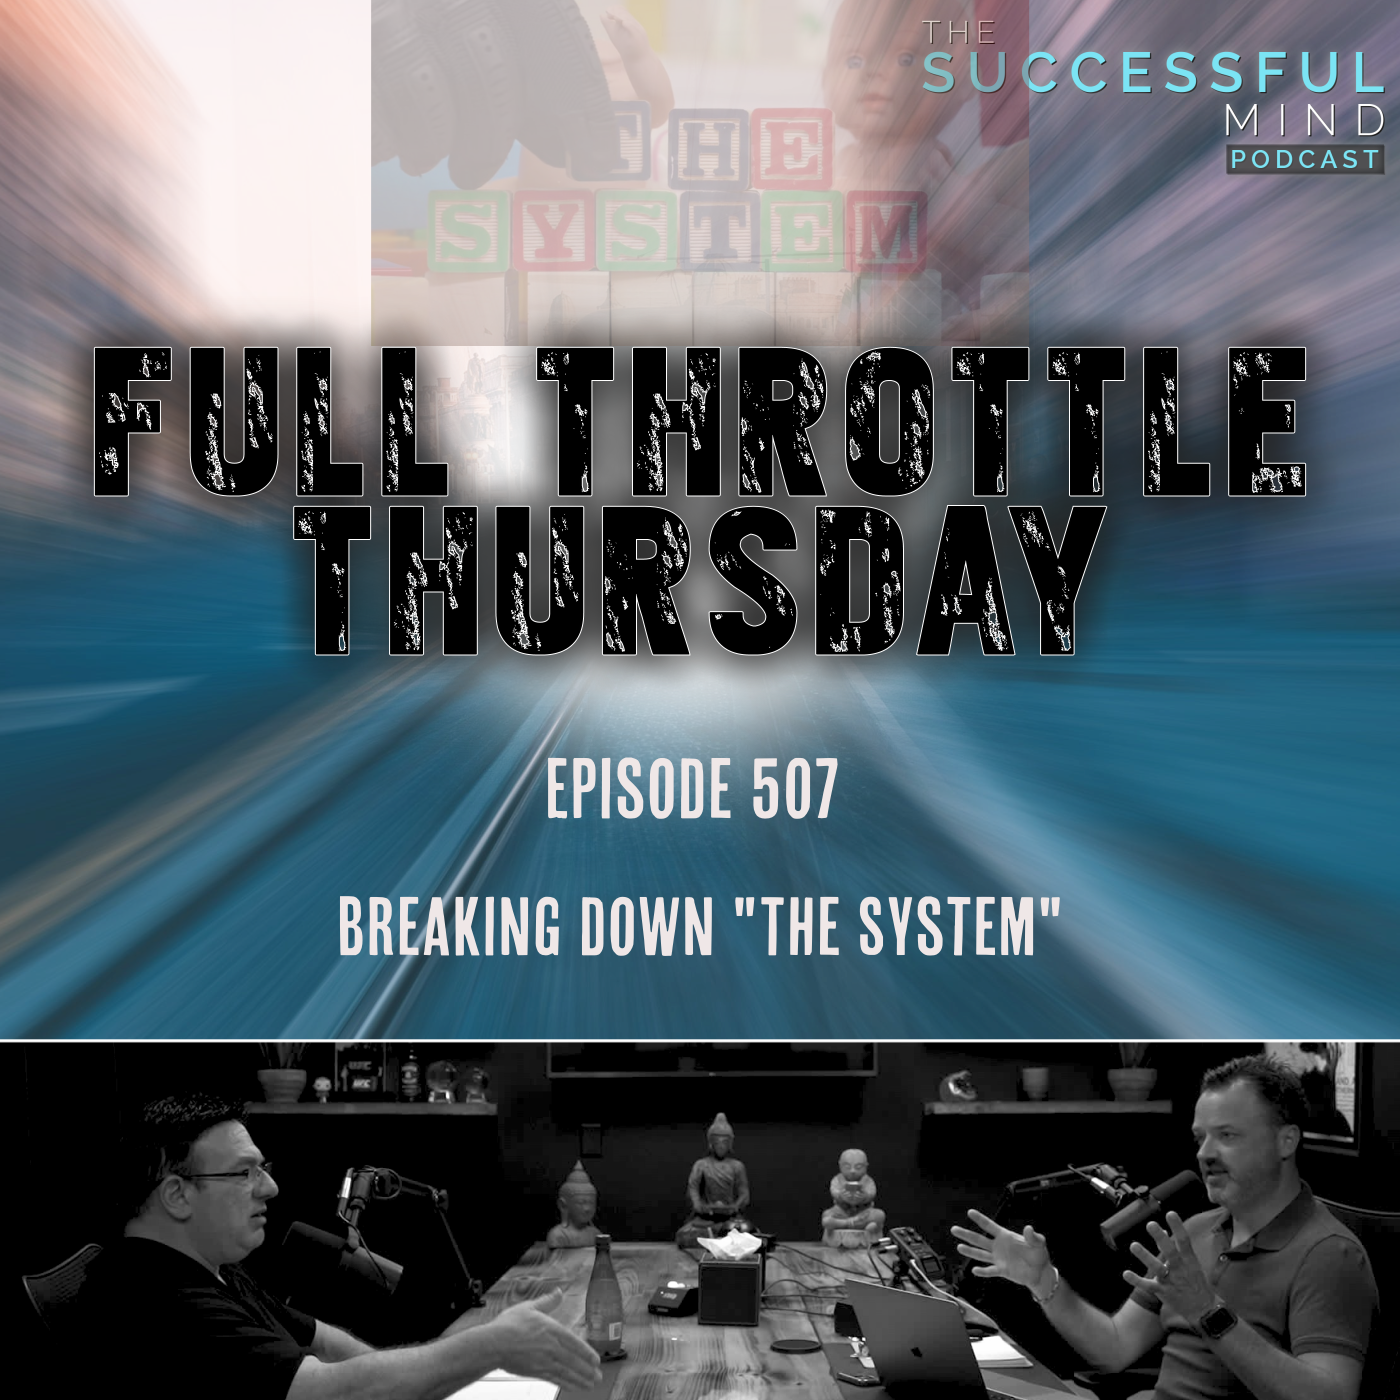 The Successful Mind Podcast - Full Throttle Thursday - Breaking Down "The System"